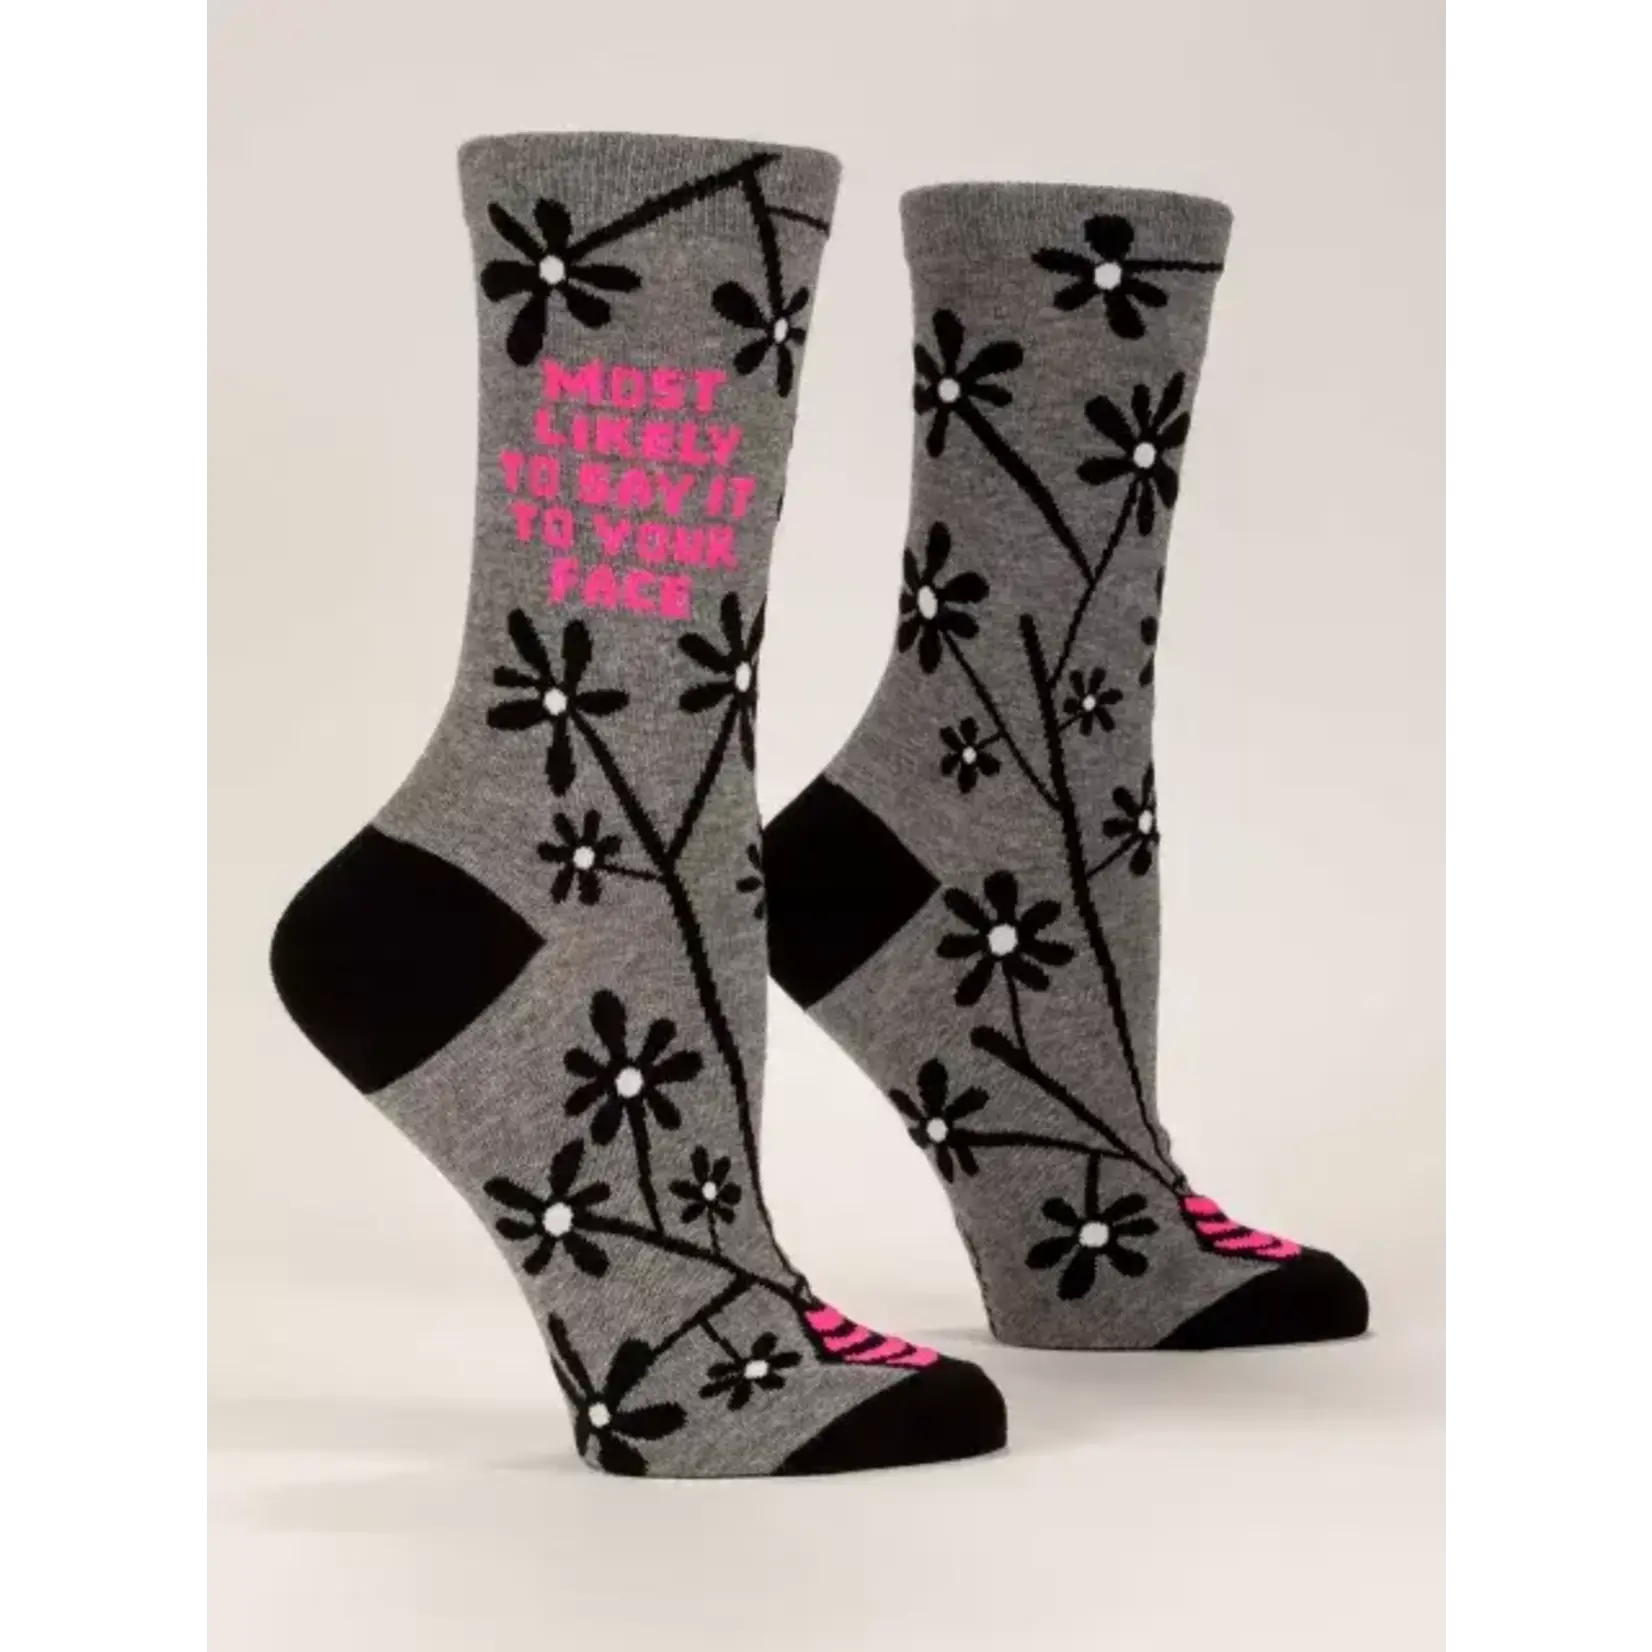 Women's Socks - Most Likely To Say It To Your Face